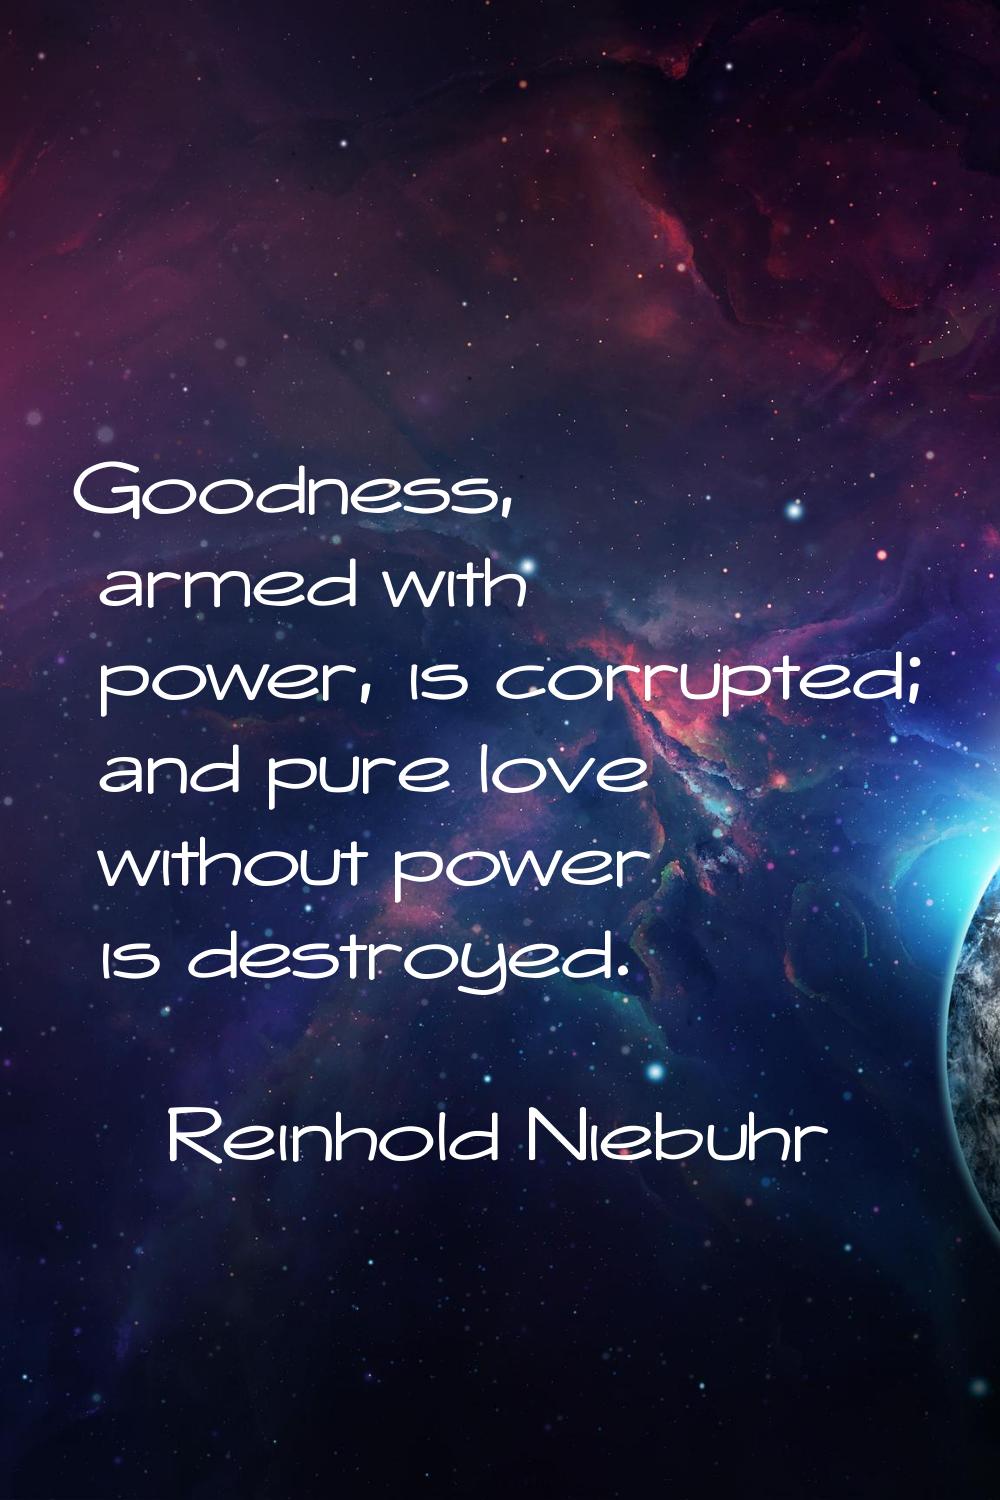 Goodness, armed with power, is corrupted; and pure love without power is destroyed.